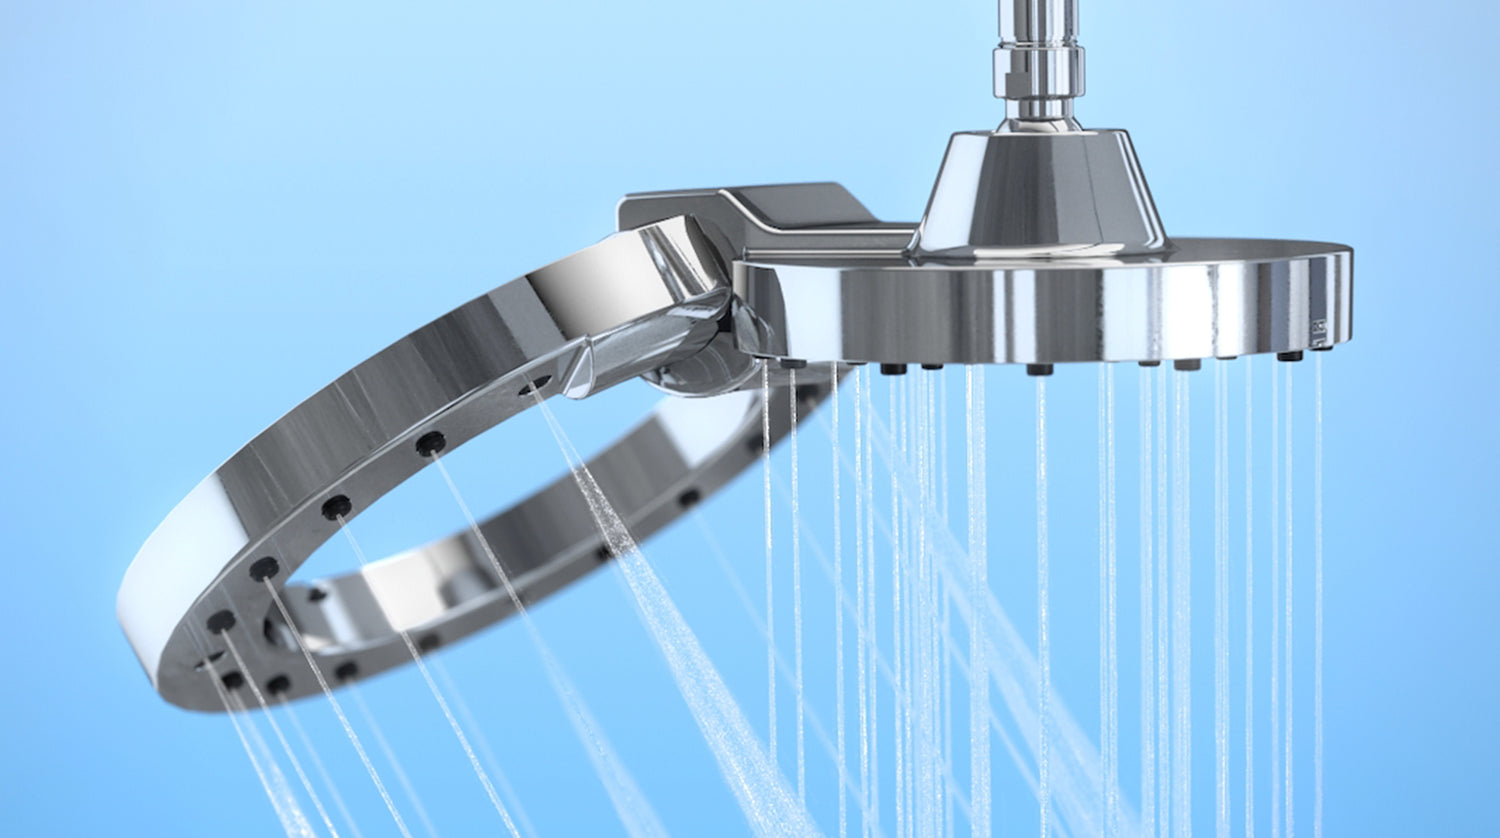 An image showing water coming out of the shower head, showing that it can be tilted and customized.